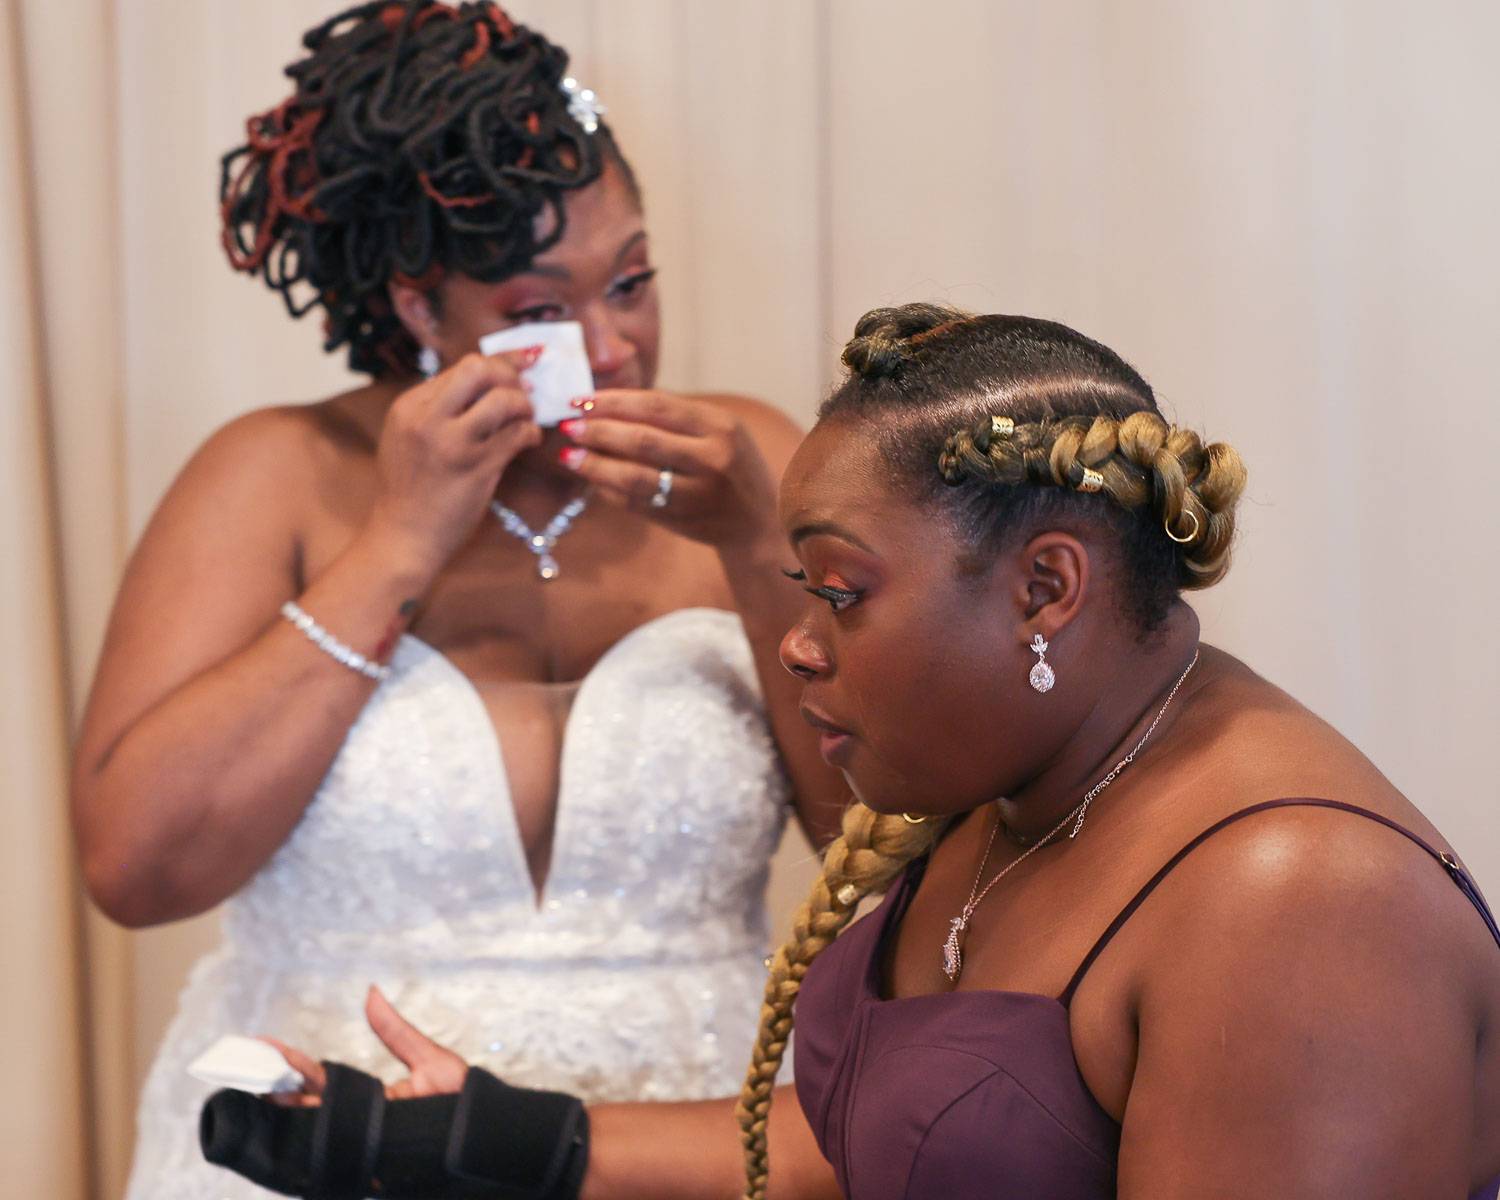 The bride wiping her tears with tissue